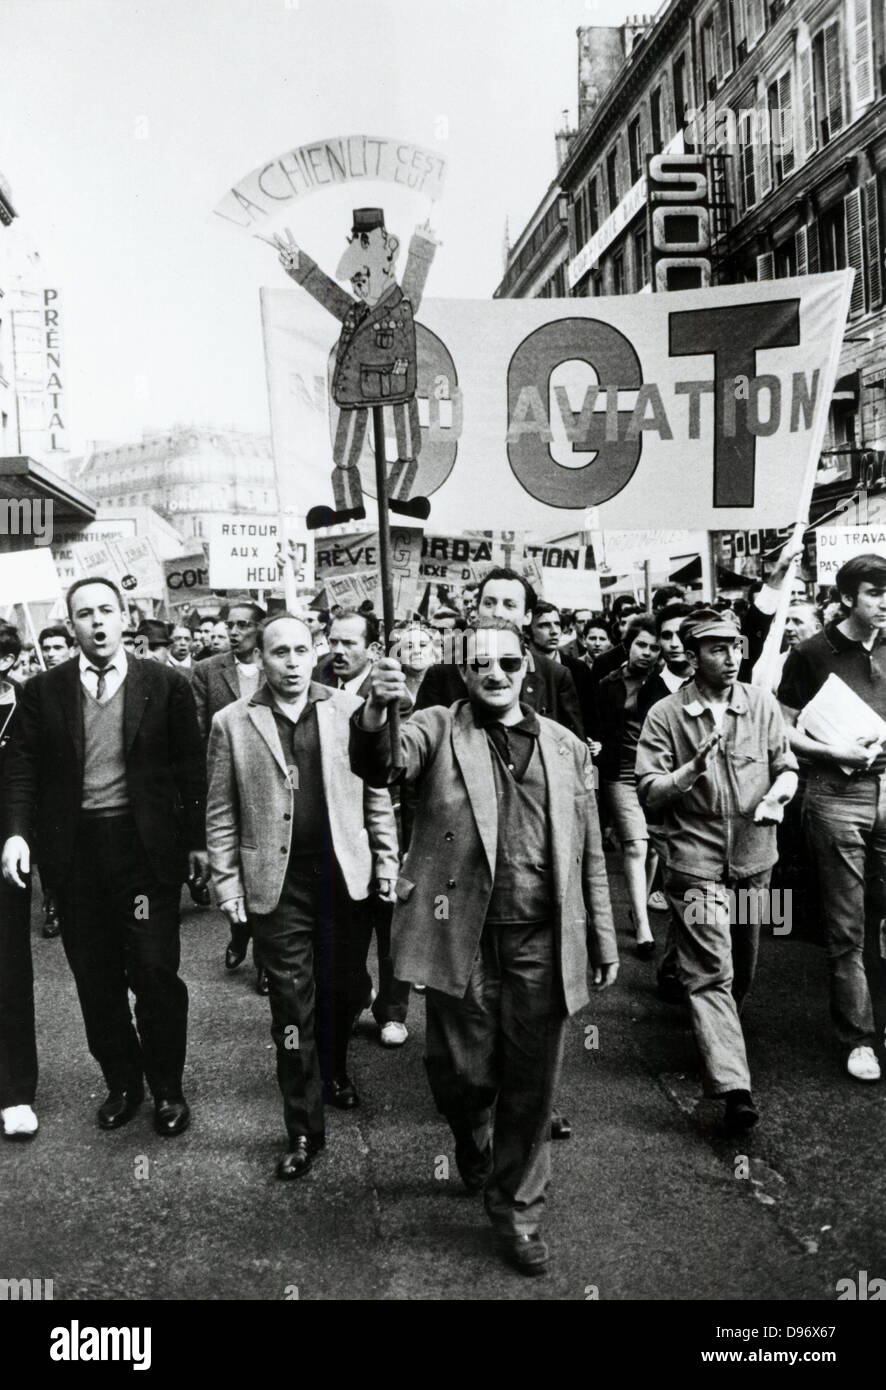 CGT Trade unionists on strike marching from the Bastille to Gare St Lazare, Paris, 29 May 1968. Stock Photo